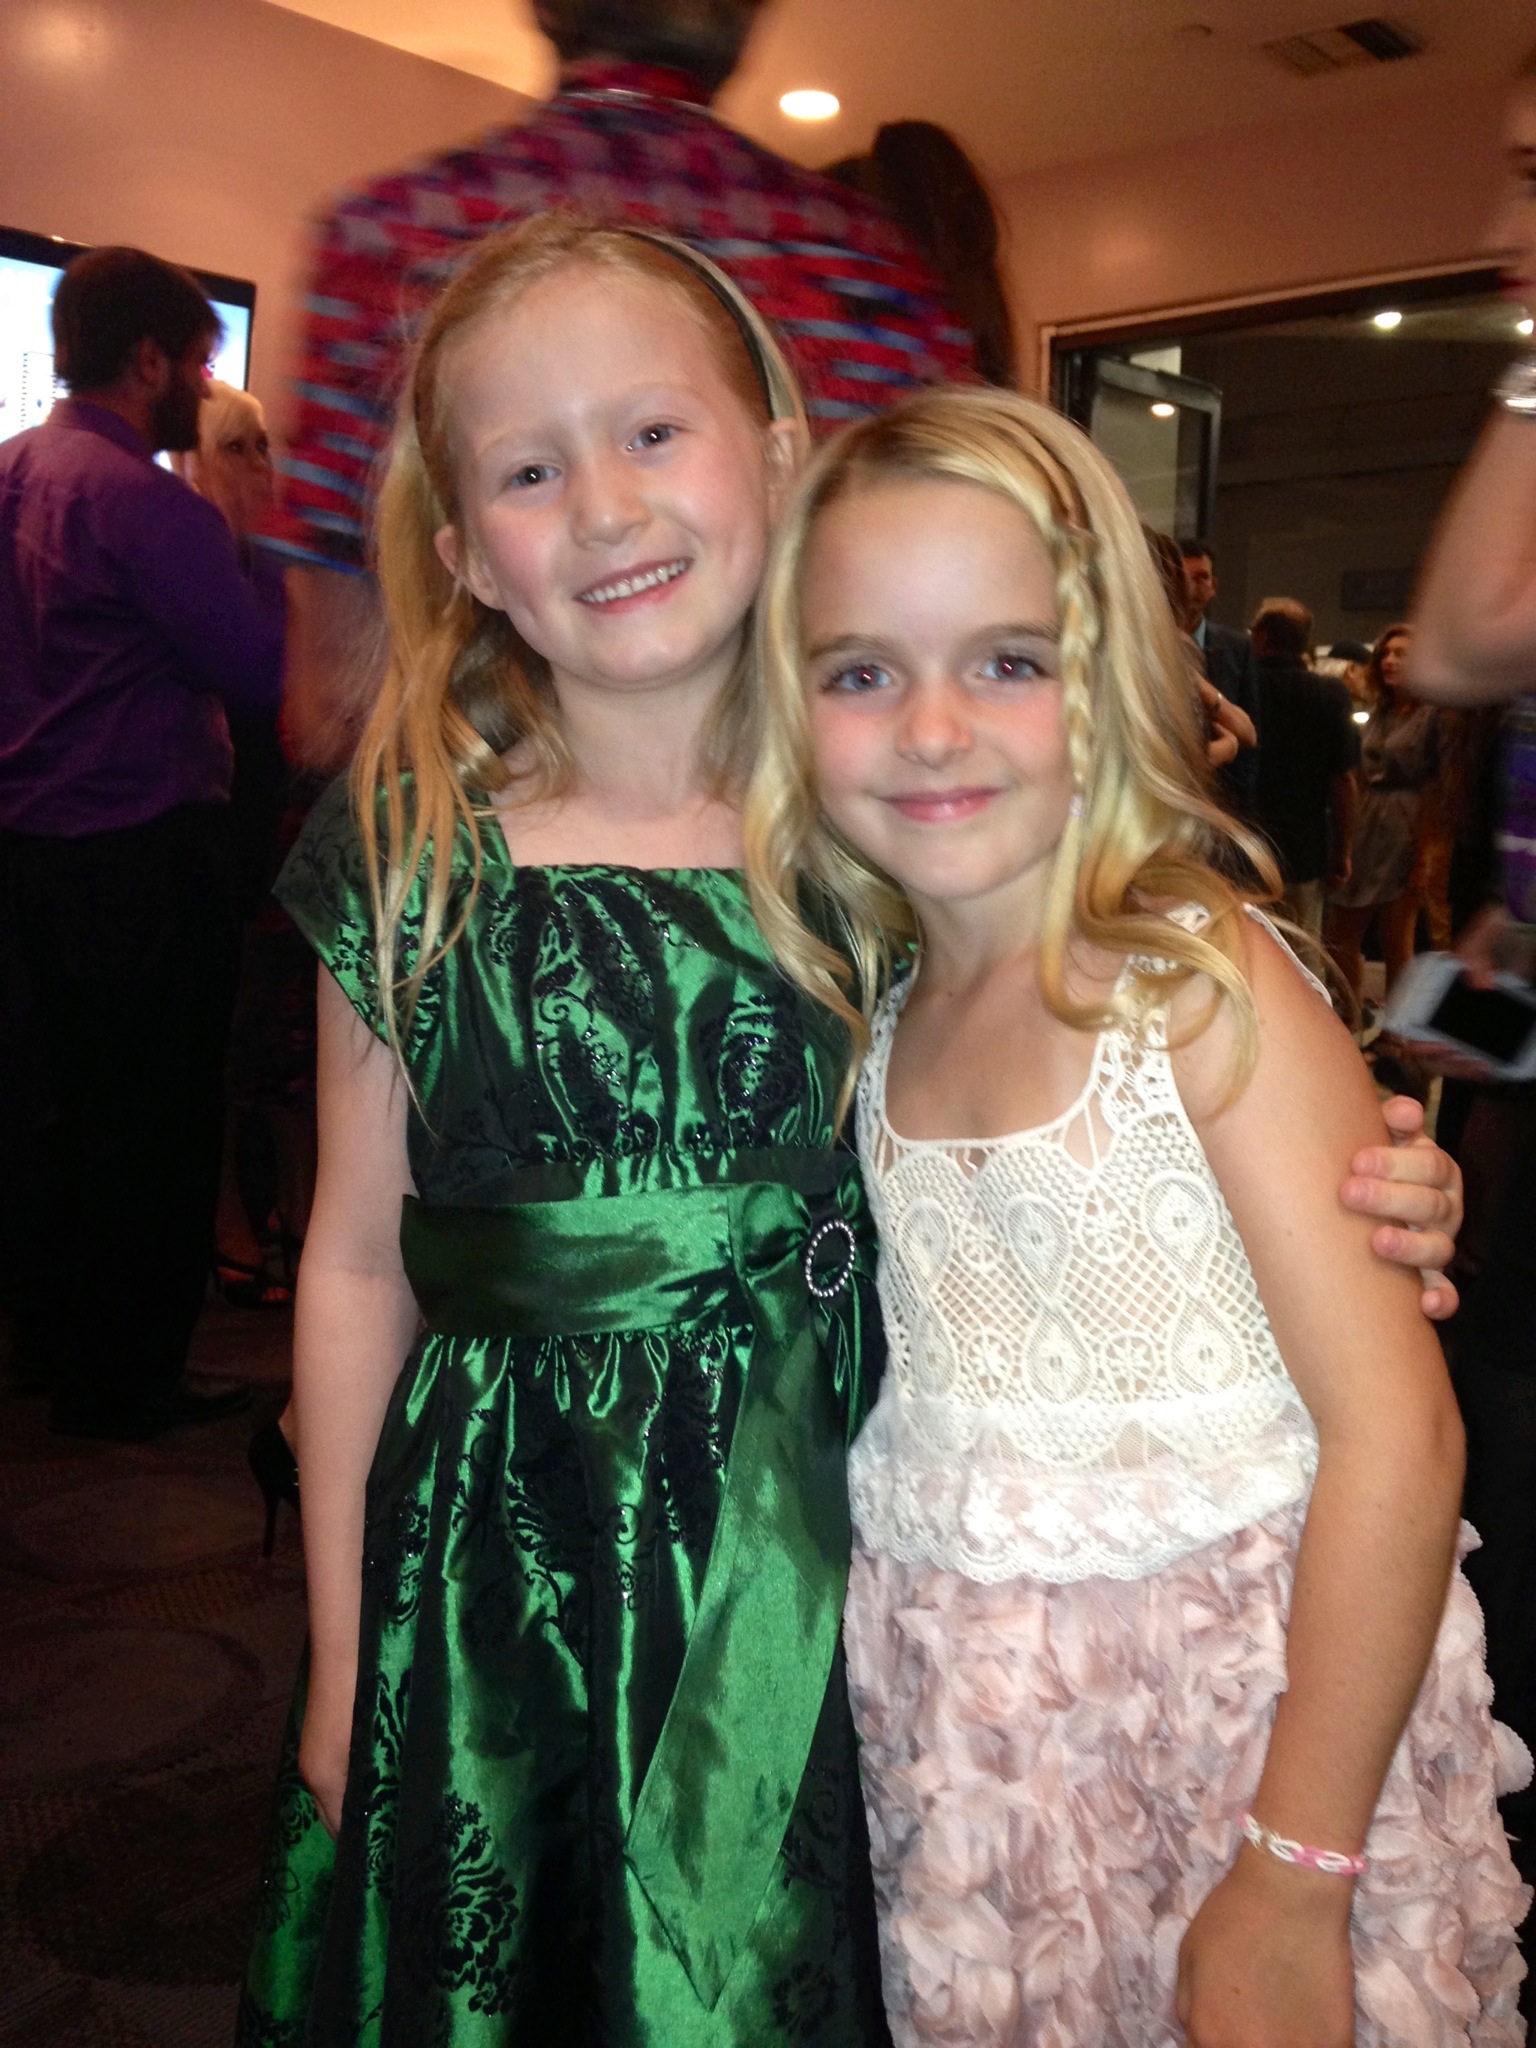 Abigail and McKenna Grace. July 22, 2014